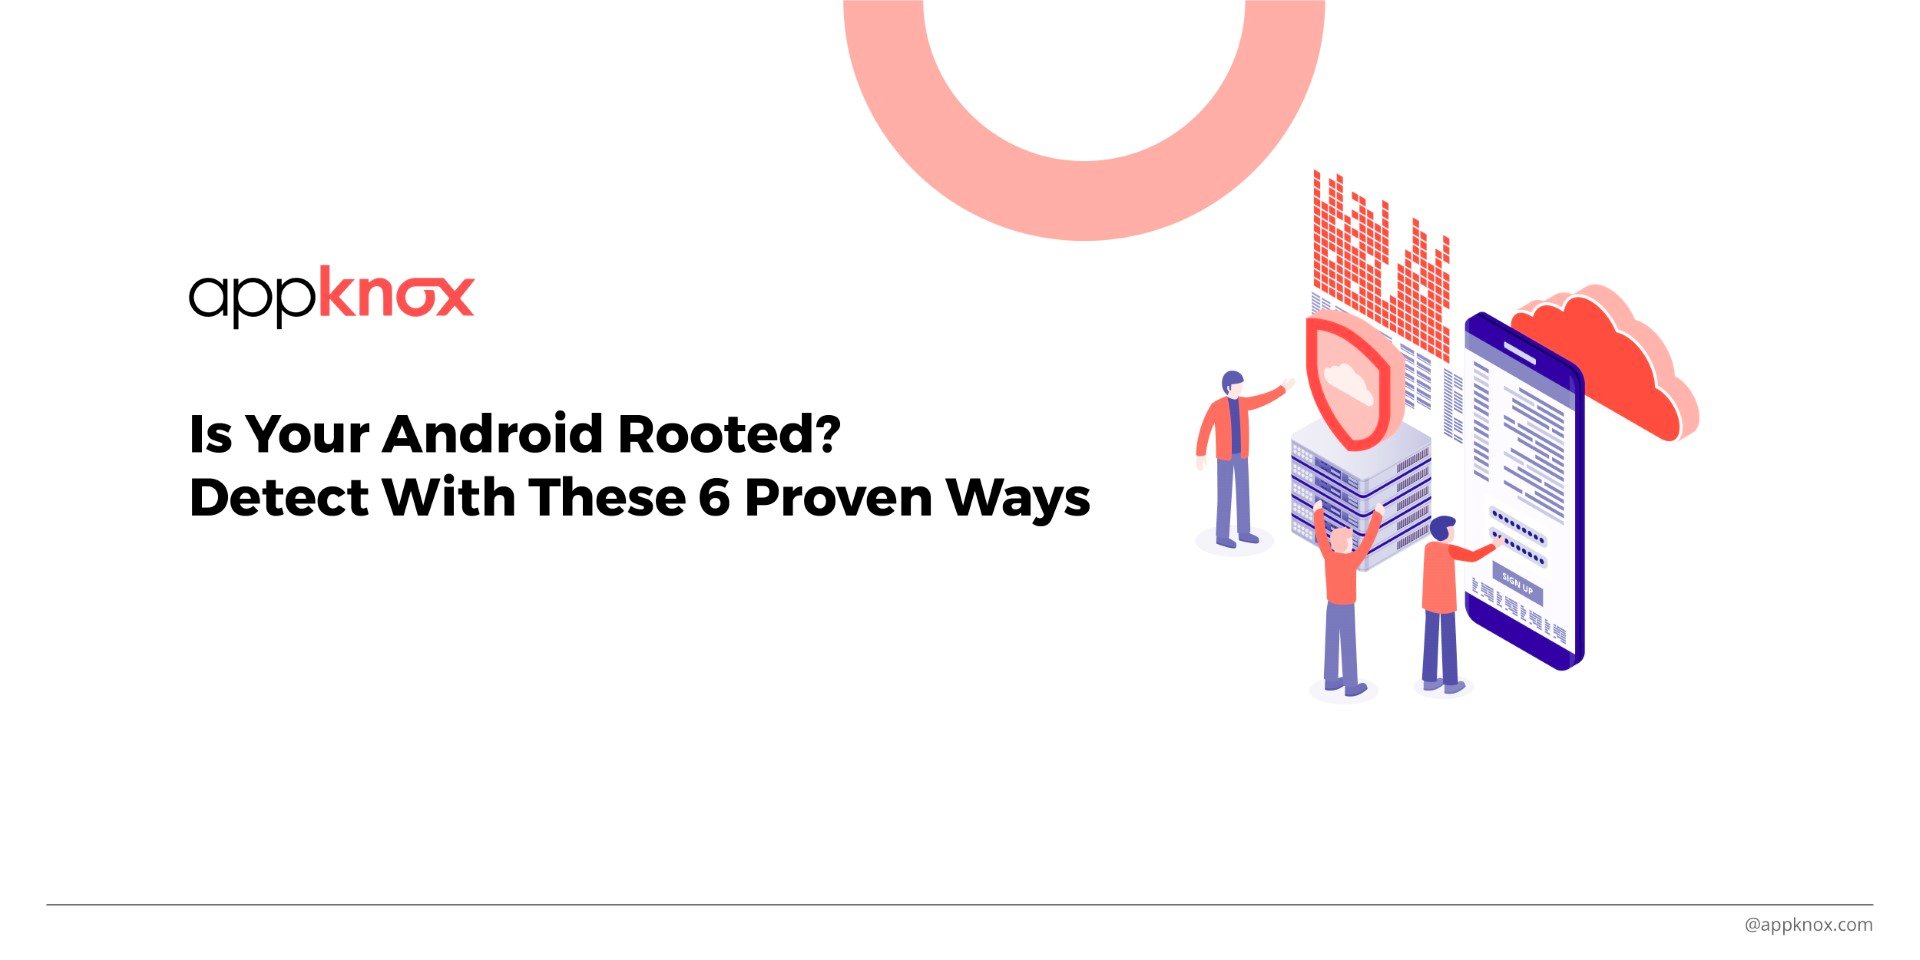 Is Your Android Rooted Detect With These 6 Proven Ways